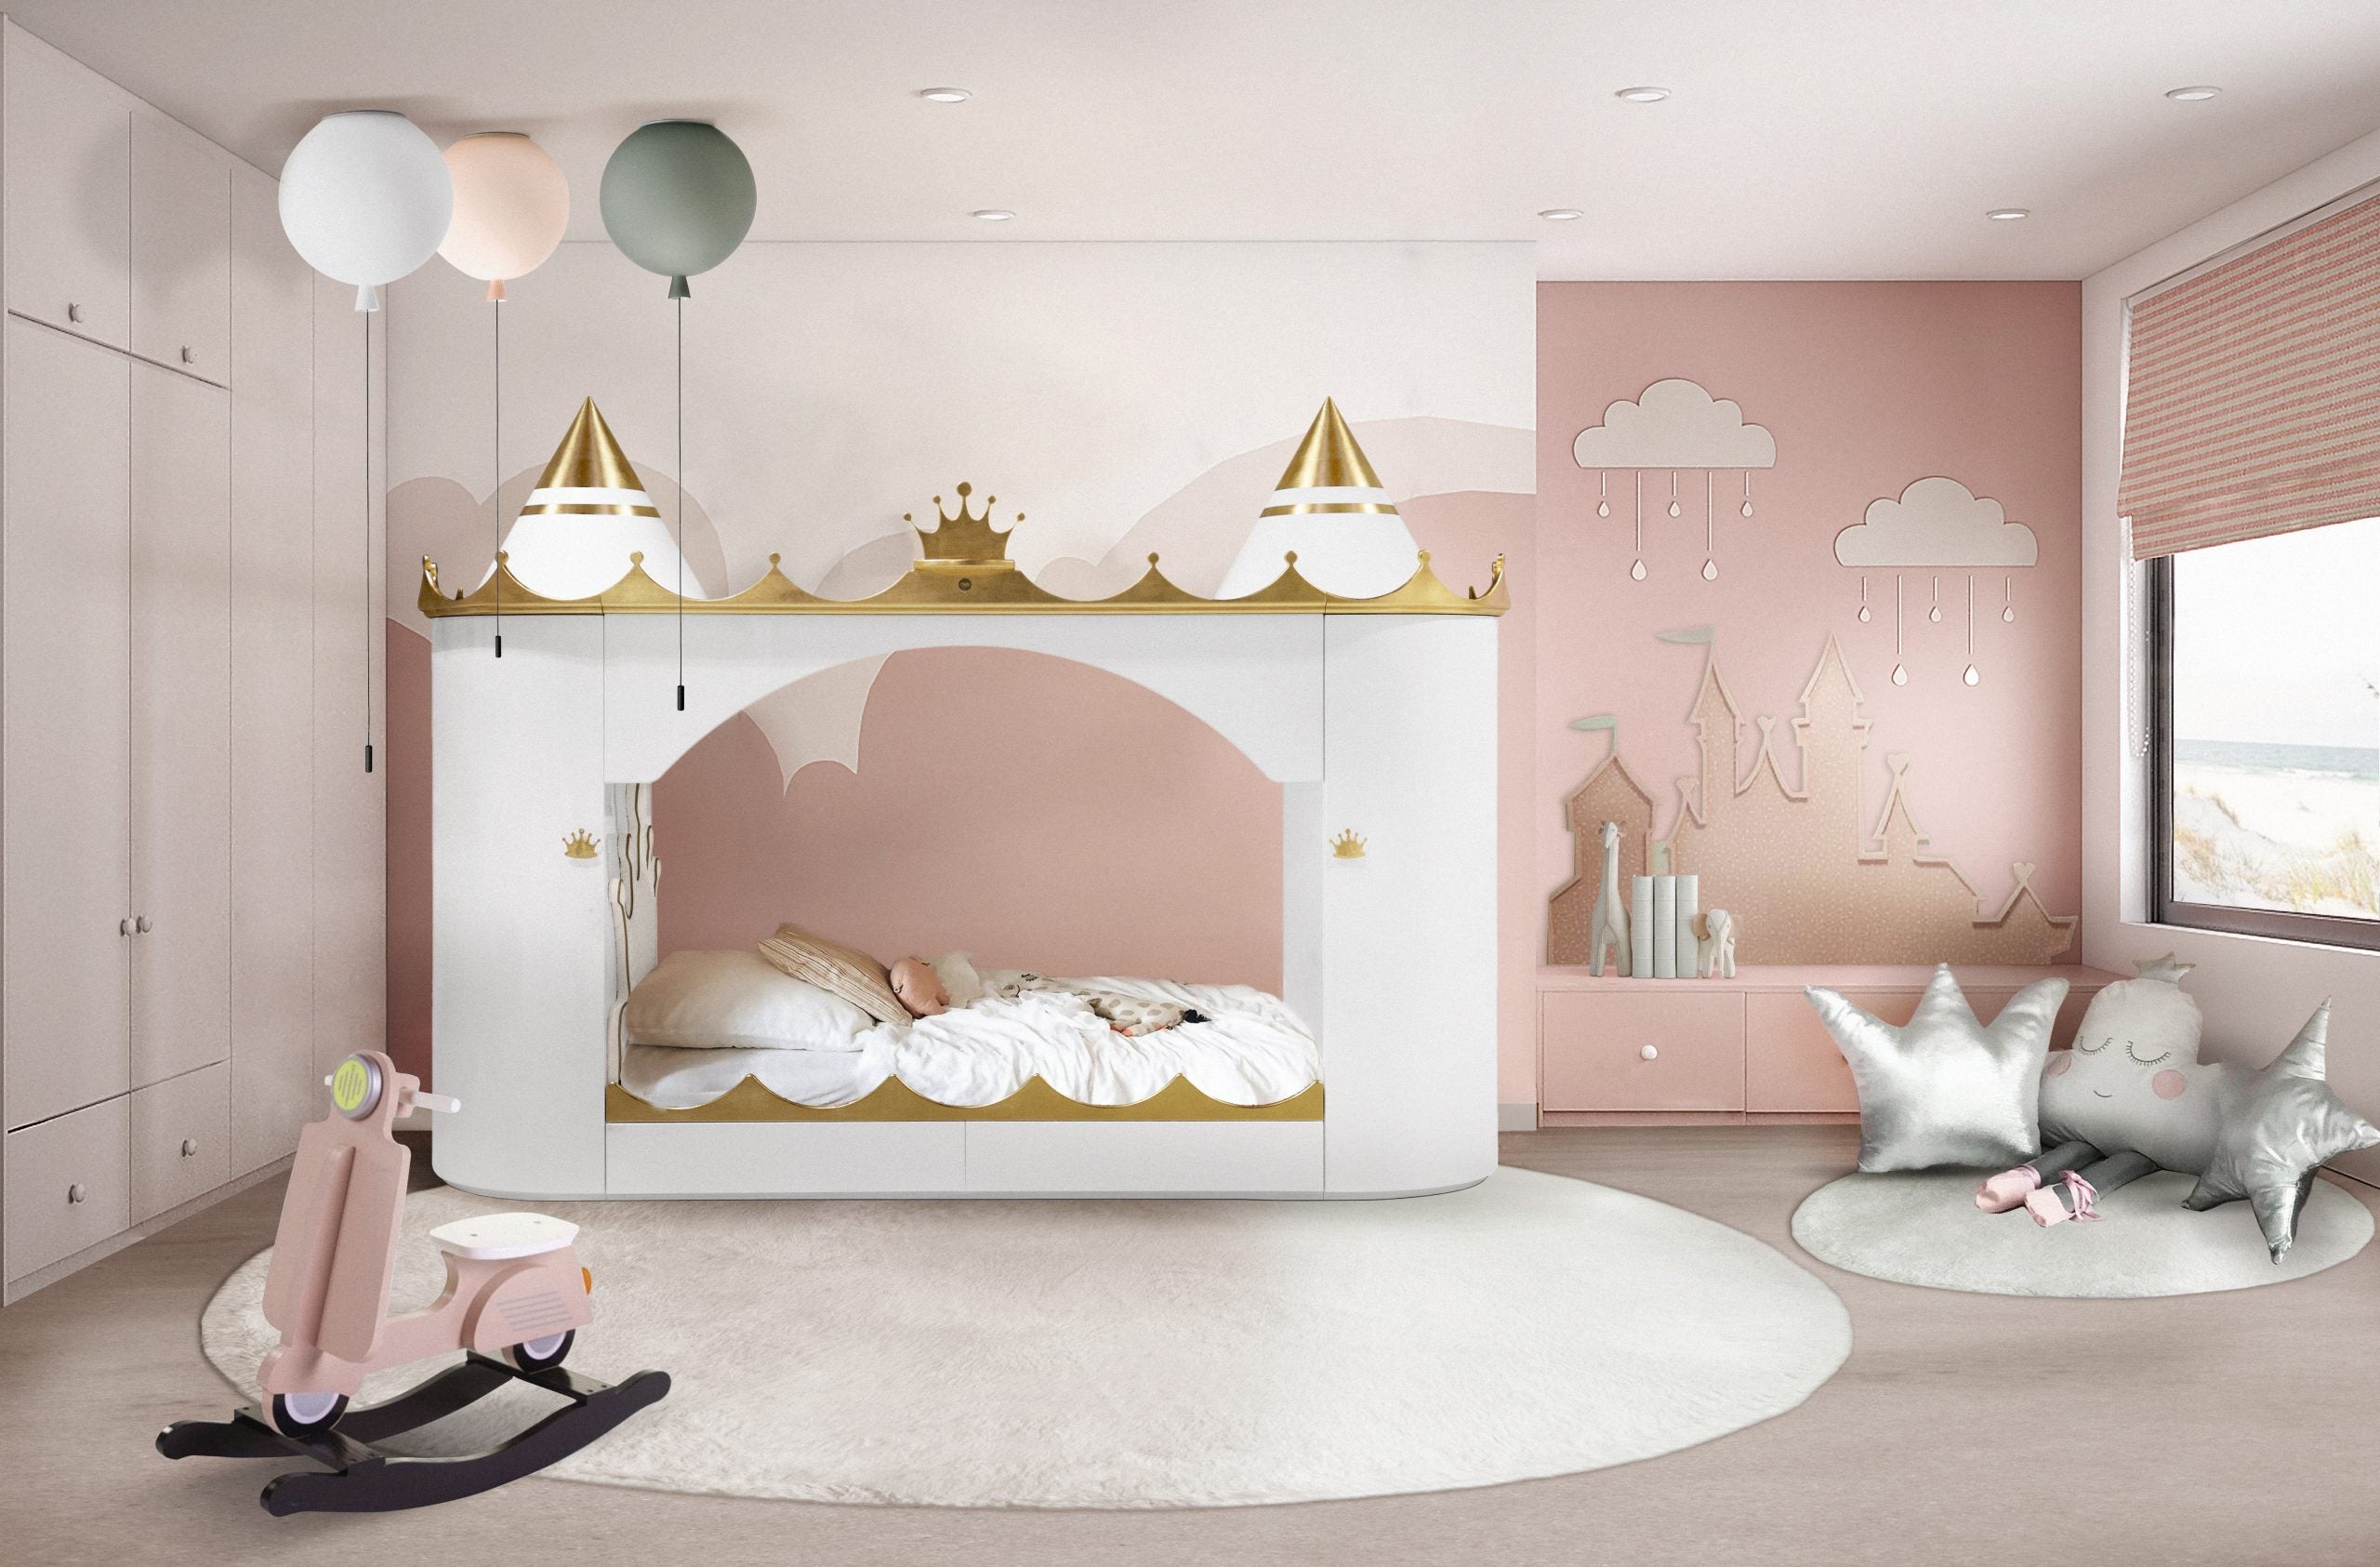 HOW TO DECORATE THE BEDROOM OF A TRUE PRINCESS